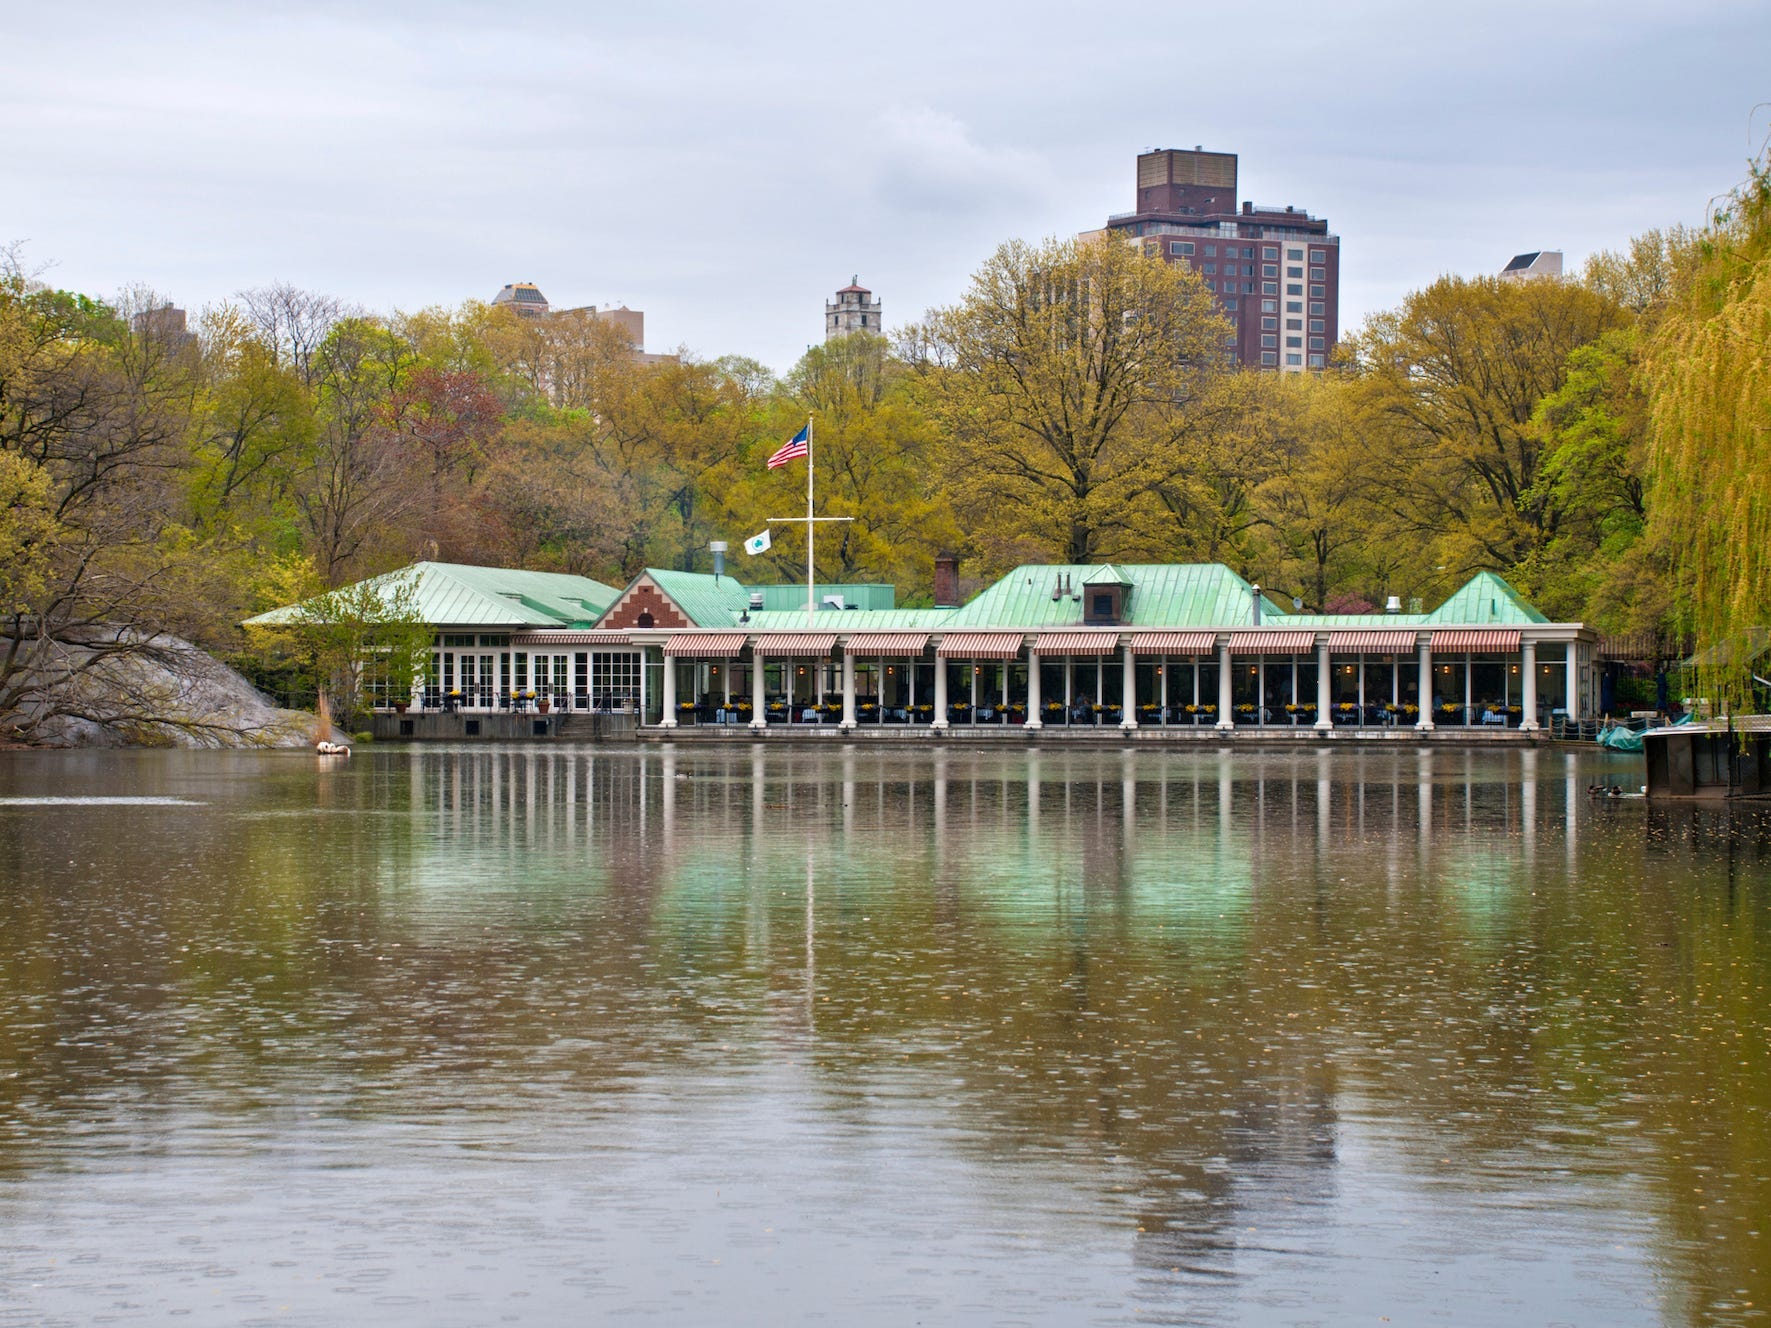 Central Park's historic Loeb Boathouse has closed its doors after 66 years